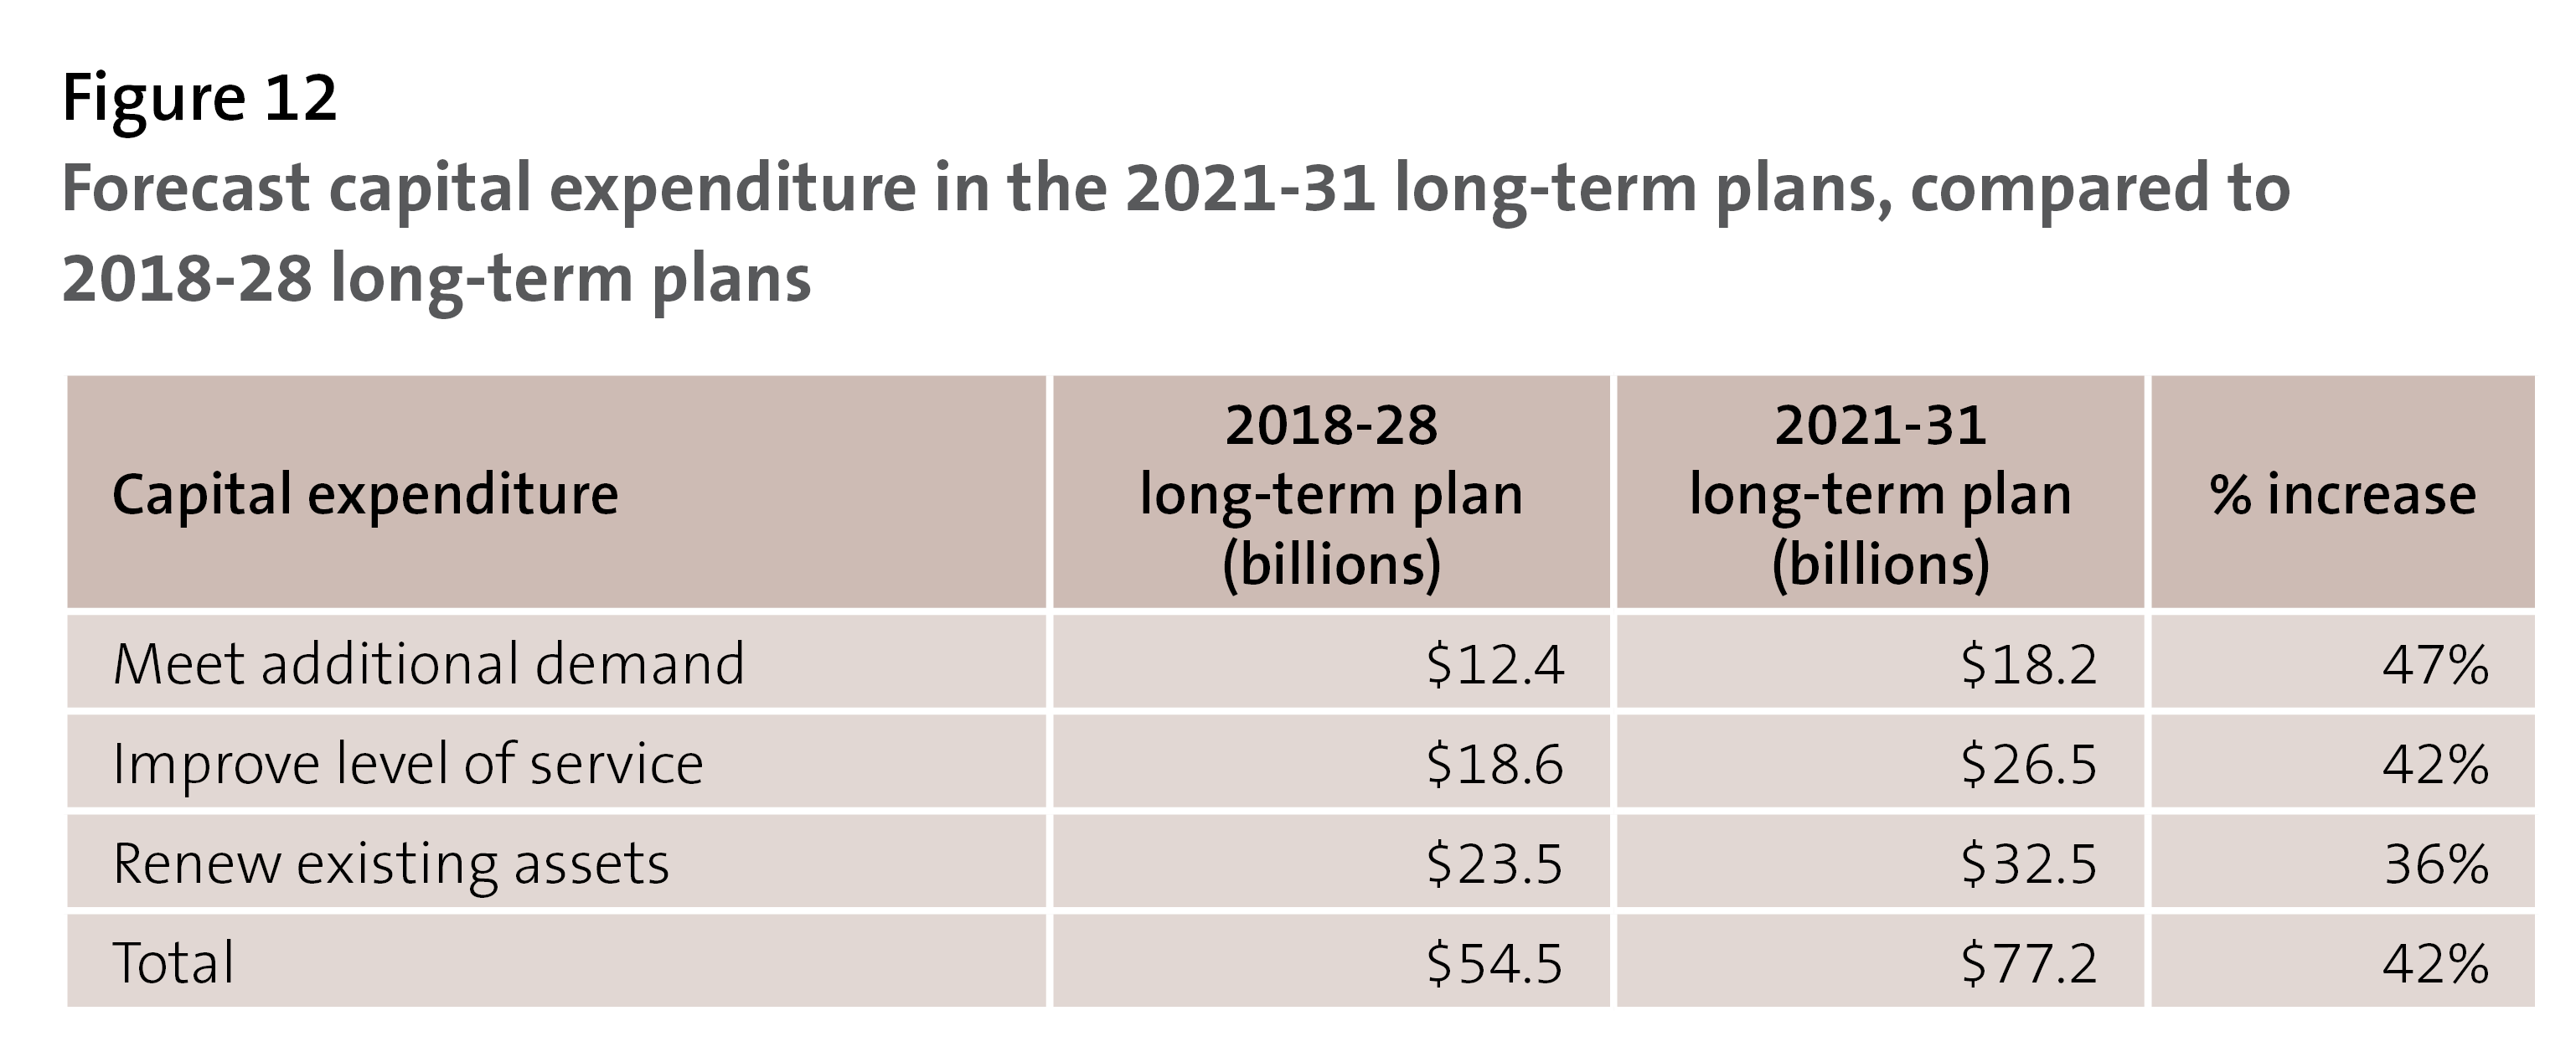 Figure 12: Forecast capital expenditure in the 2021-31 long-term plans, compared to 2018-28 long-term plans